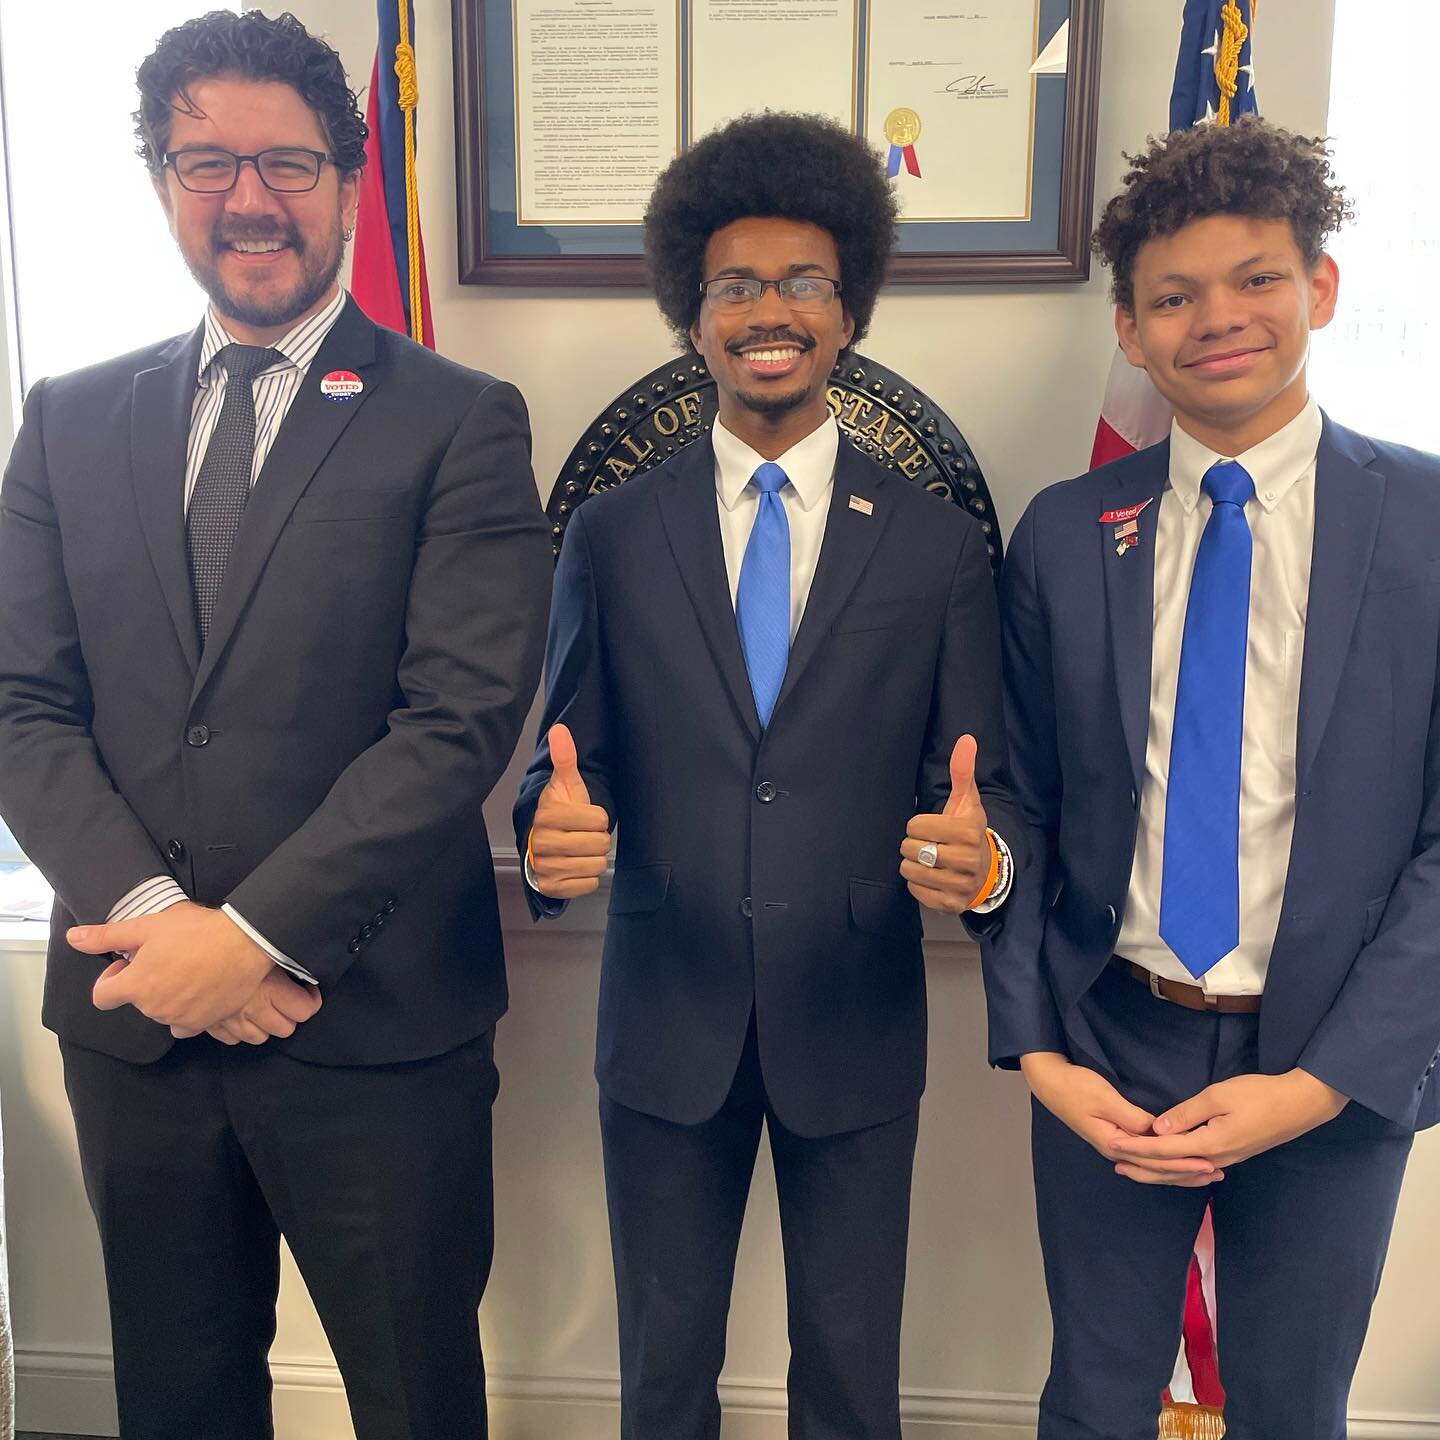 I am so proud of our Senior Policy Analyst Ian and our Digital Media Intern Jermaine for going to vote today! Today is the last day to vote in the general election primaries! Please go and vote. Your voice matters and your vote matters! GO VOTE!! 

M